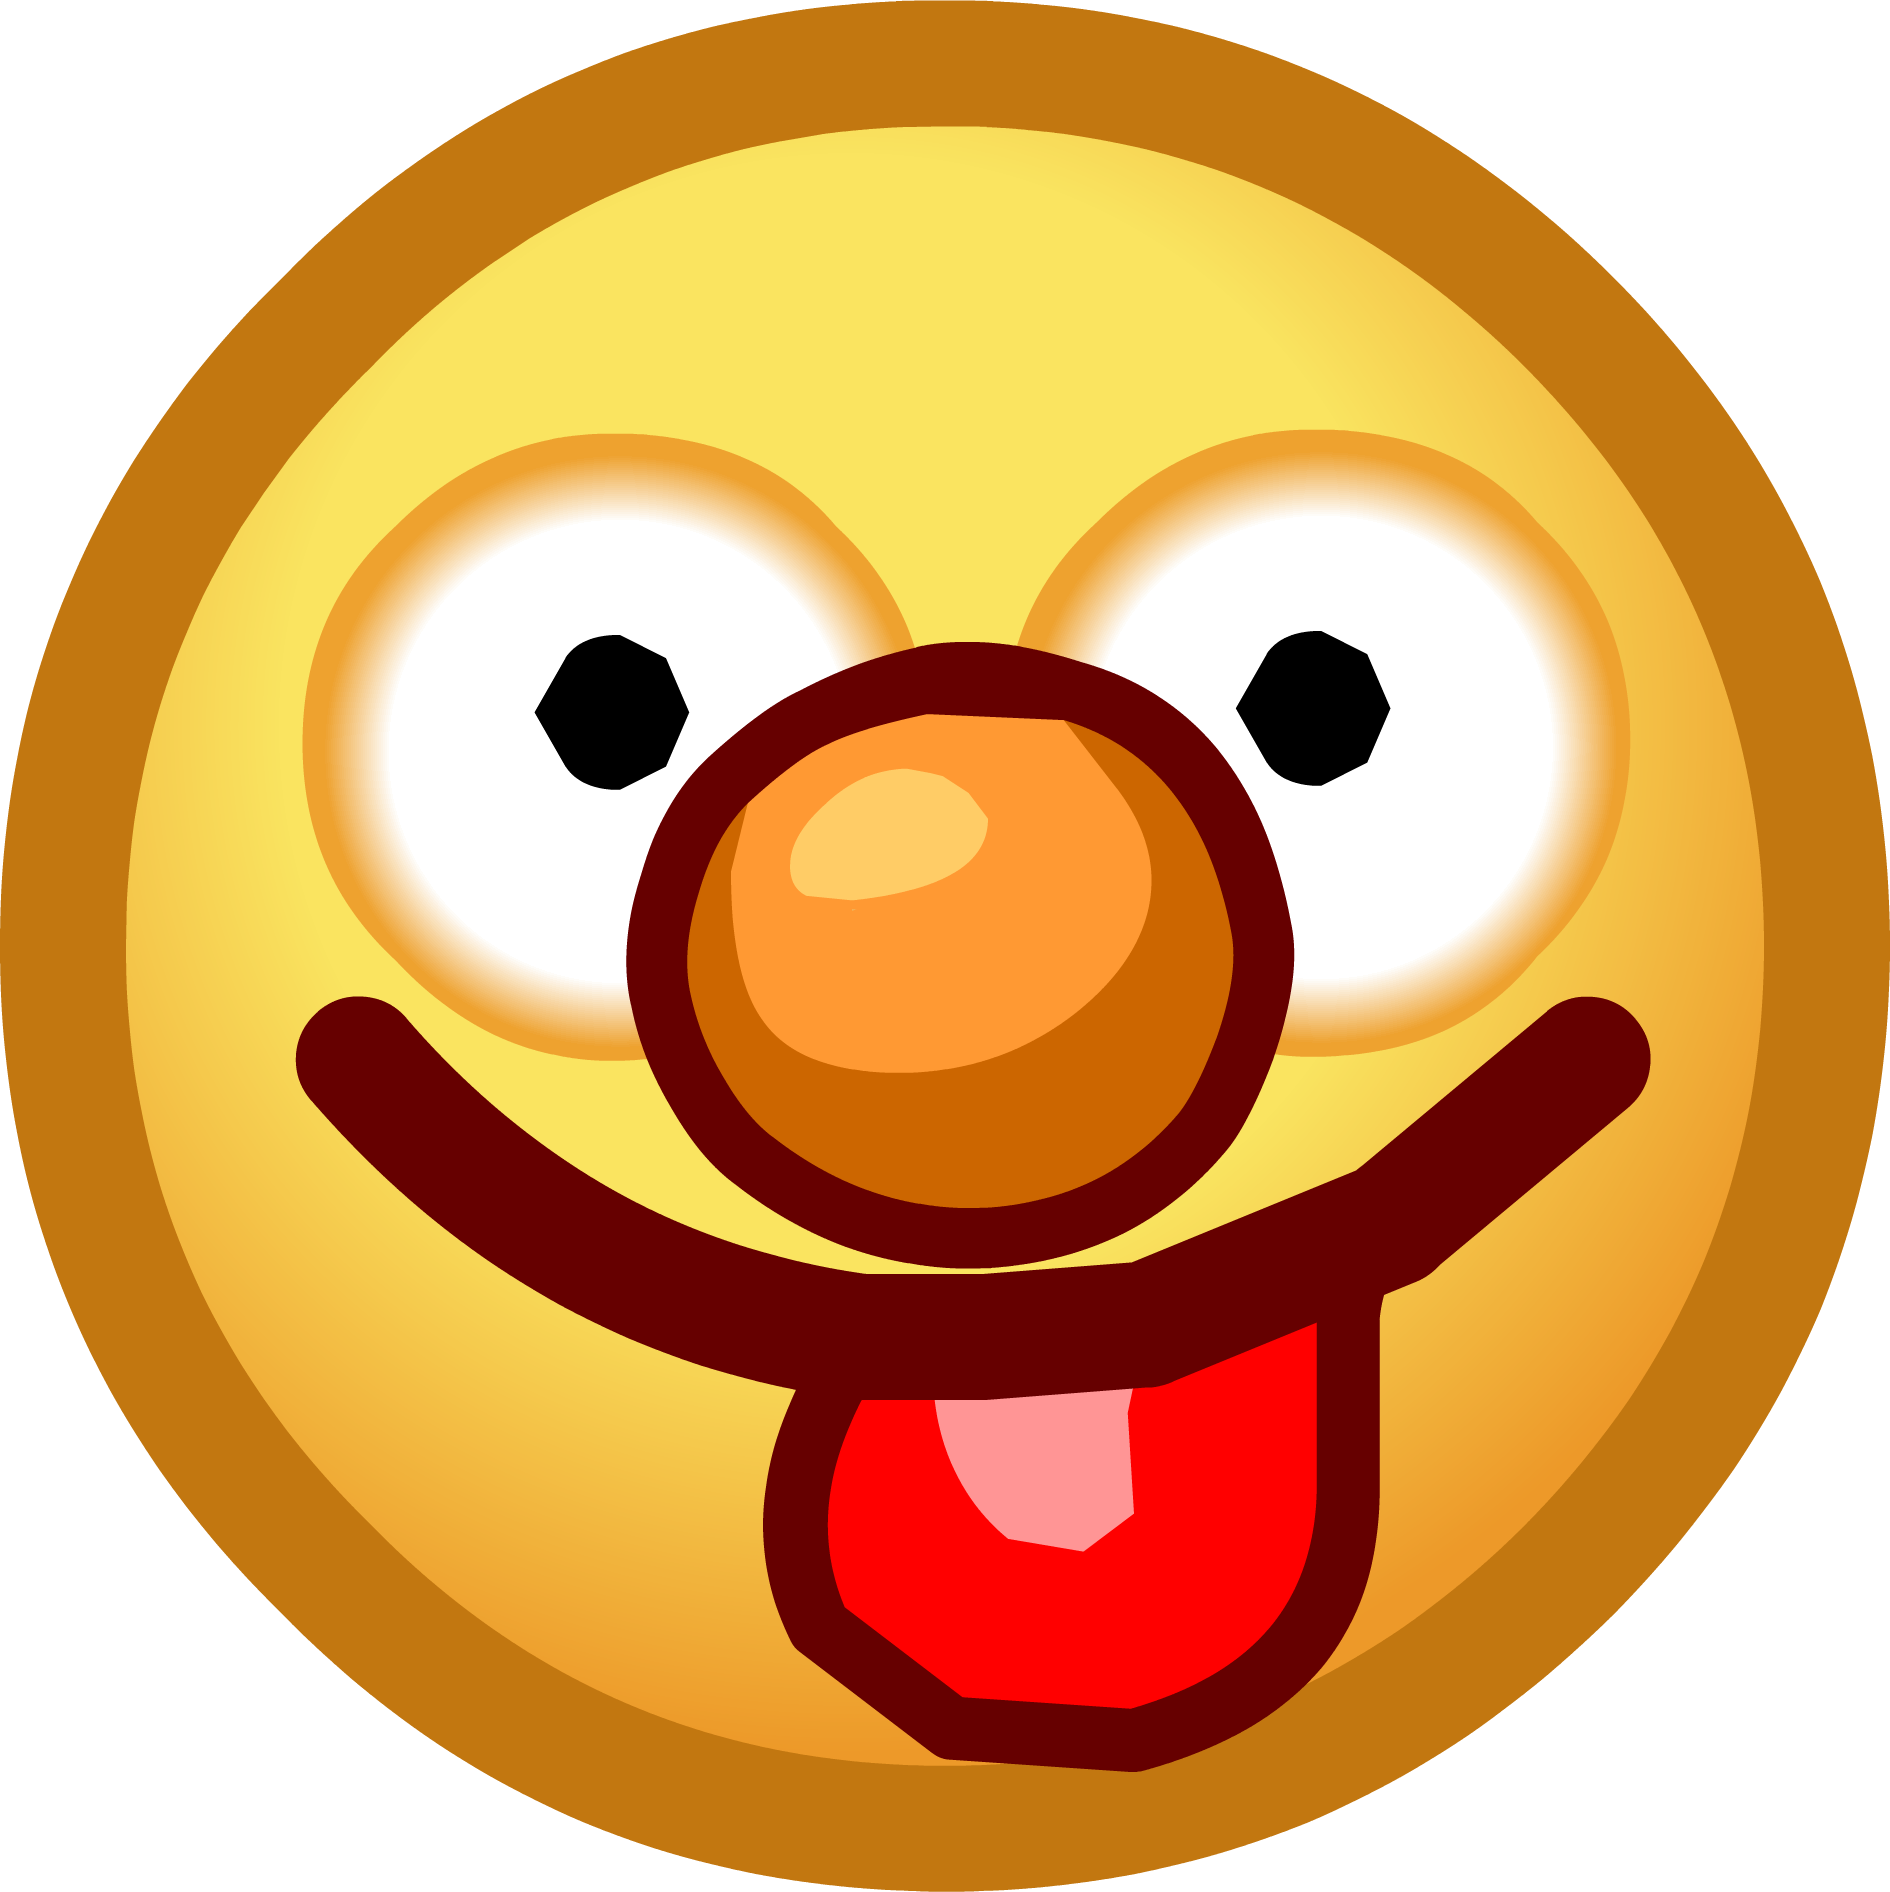 List of Emoticons - Club Penguin Wiki - The free, editable 